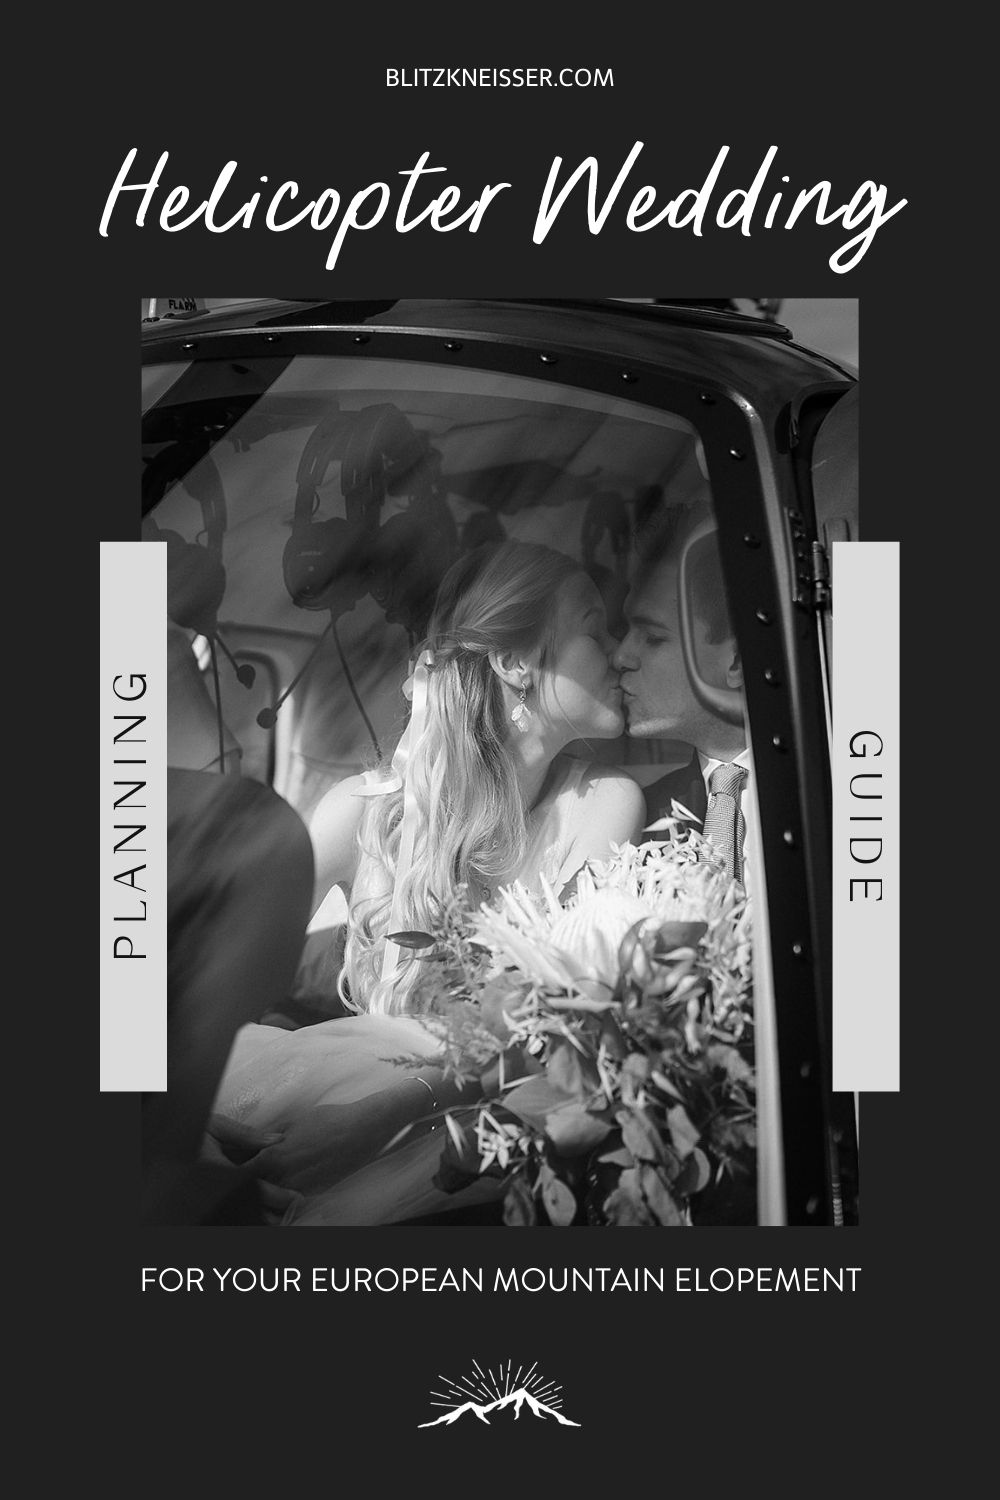 Black and white photo of the bride and groom sharing a kiss inside a helicopter; image overlaid with text that reads Helicopter Wedding Planning Guide For Your Mountain Elopement